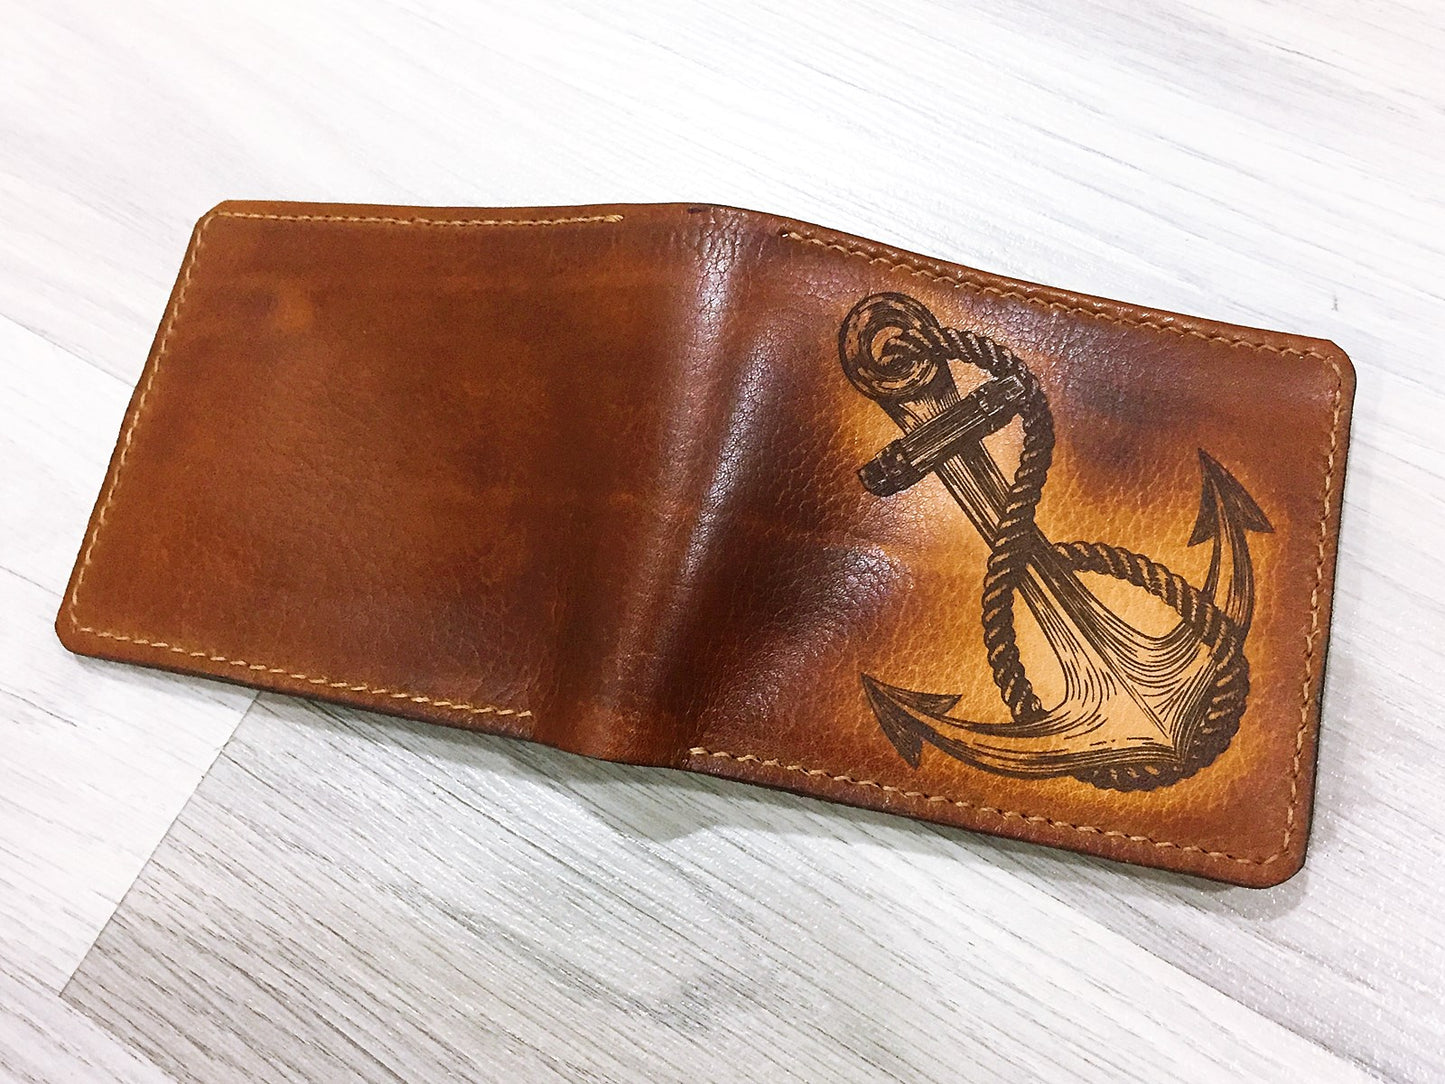 Mayan Corner - Anchor leather handmade men's wallet, custom gifts for him, father's day gifts, anniversary gift for men